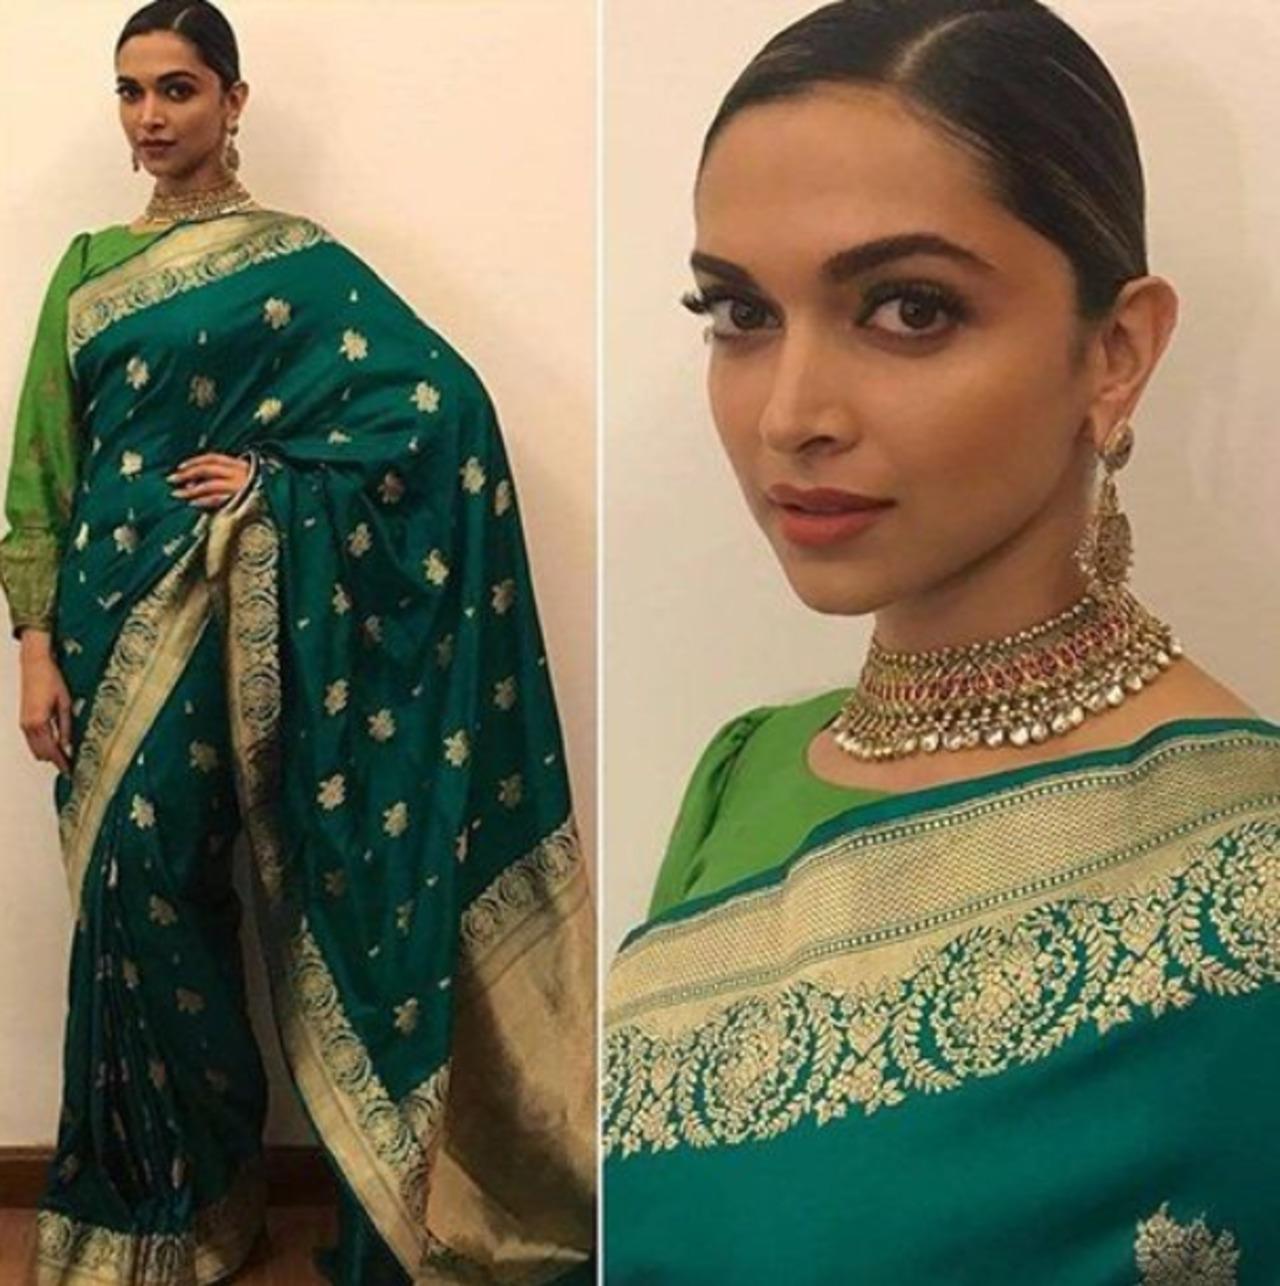 Who better to look towards when in a fashion dilemma than Bollywood's resident diva, Deepika Padukone? The actress looks simply stunning in any outfit she dons, be it modern or traditional. Her royal green and gold saree paired with a bun hairstyle makes for a stately ethnic outfit